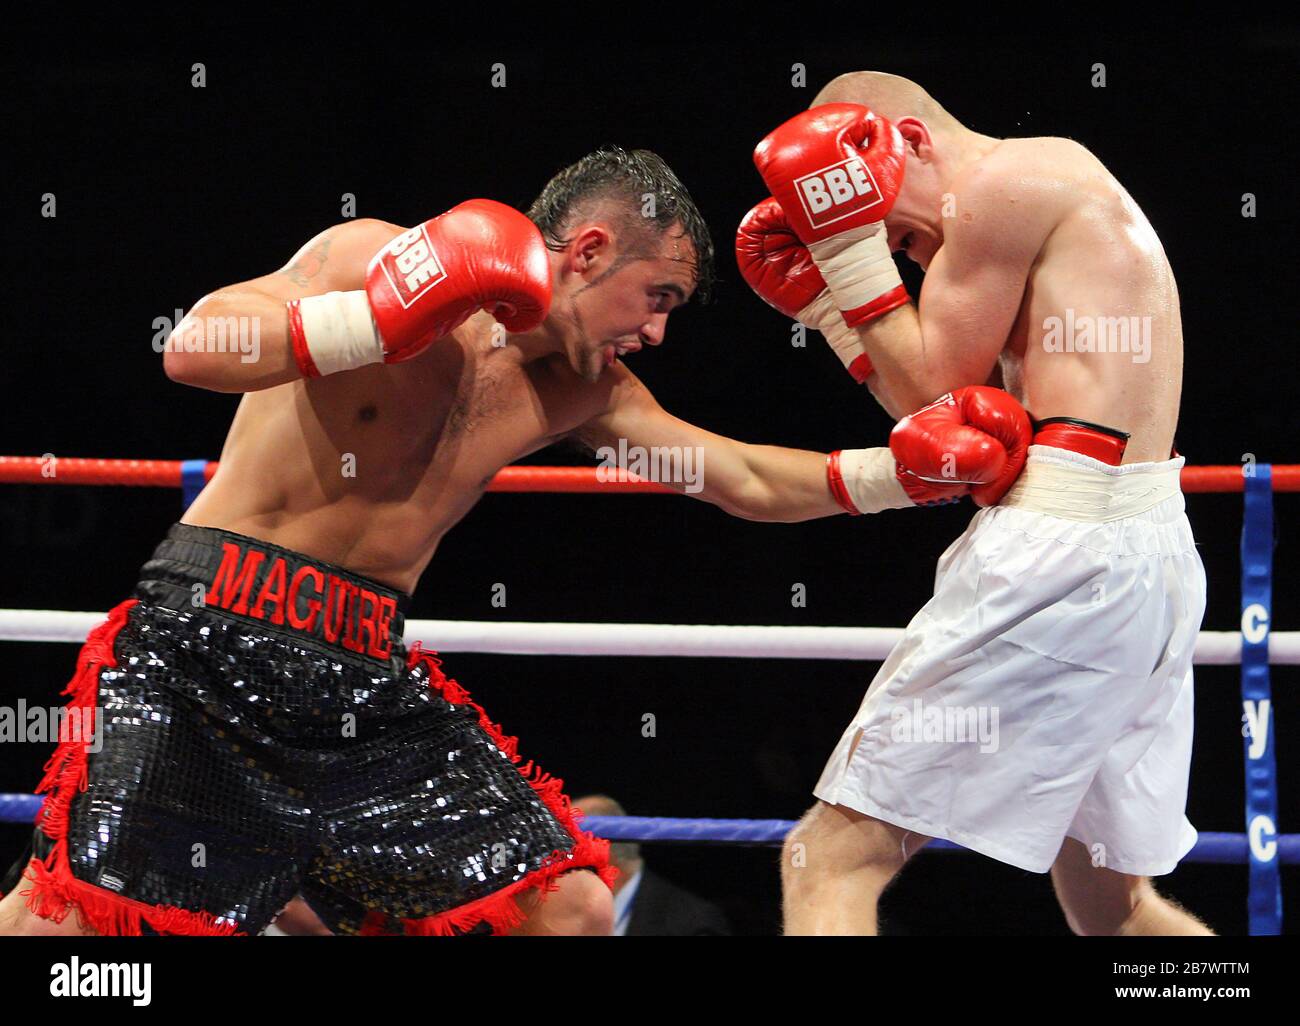 Michael Maguire (black/red shorts) defeats Pavels Senkovs in a Super-Bantamweight boxing contest at the Brentwood Centre, promoted by Frank Maloney Stock Photo